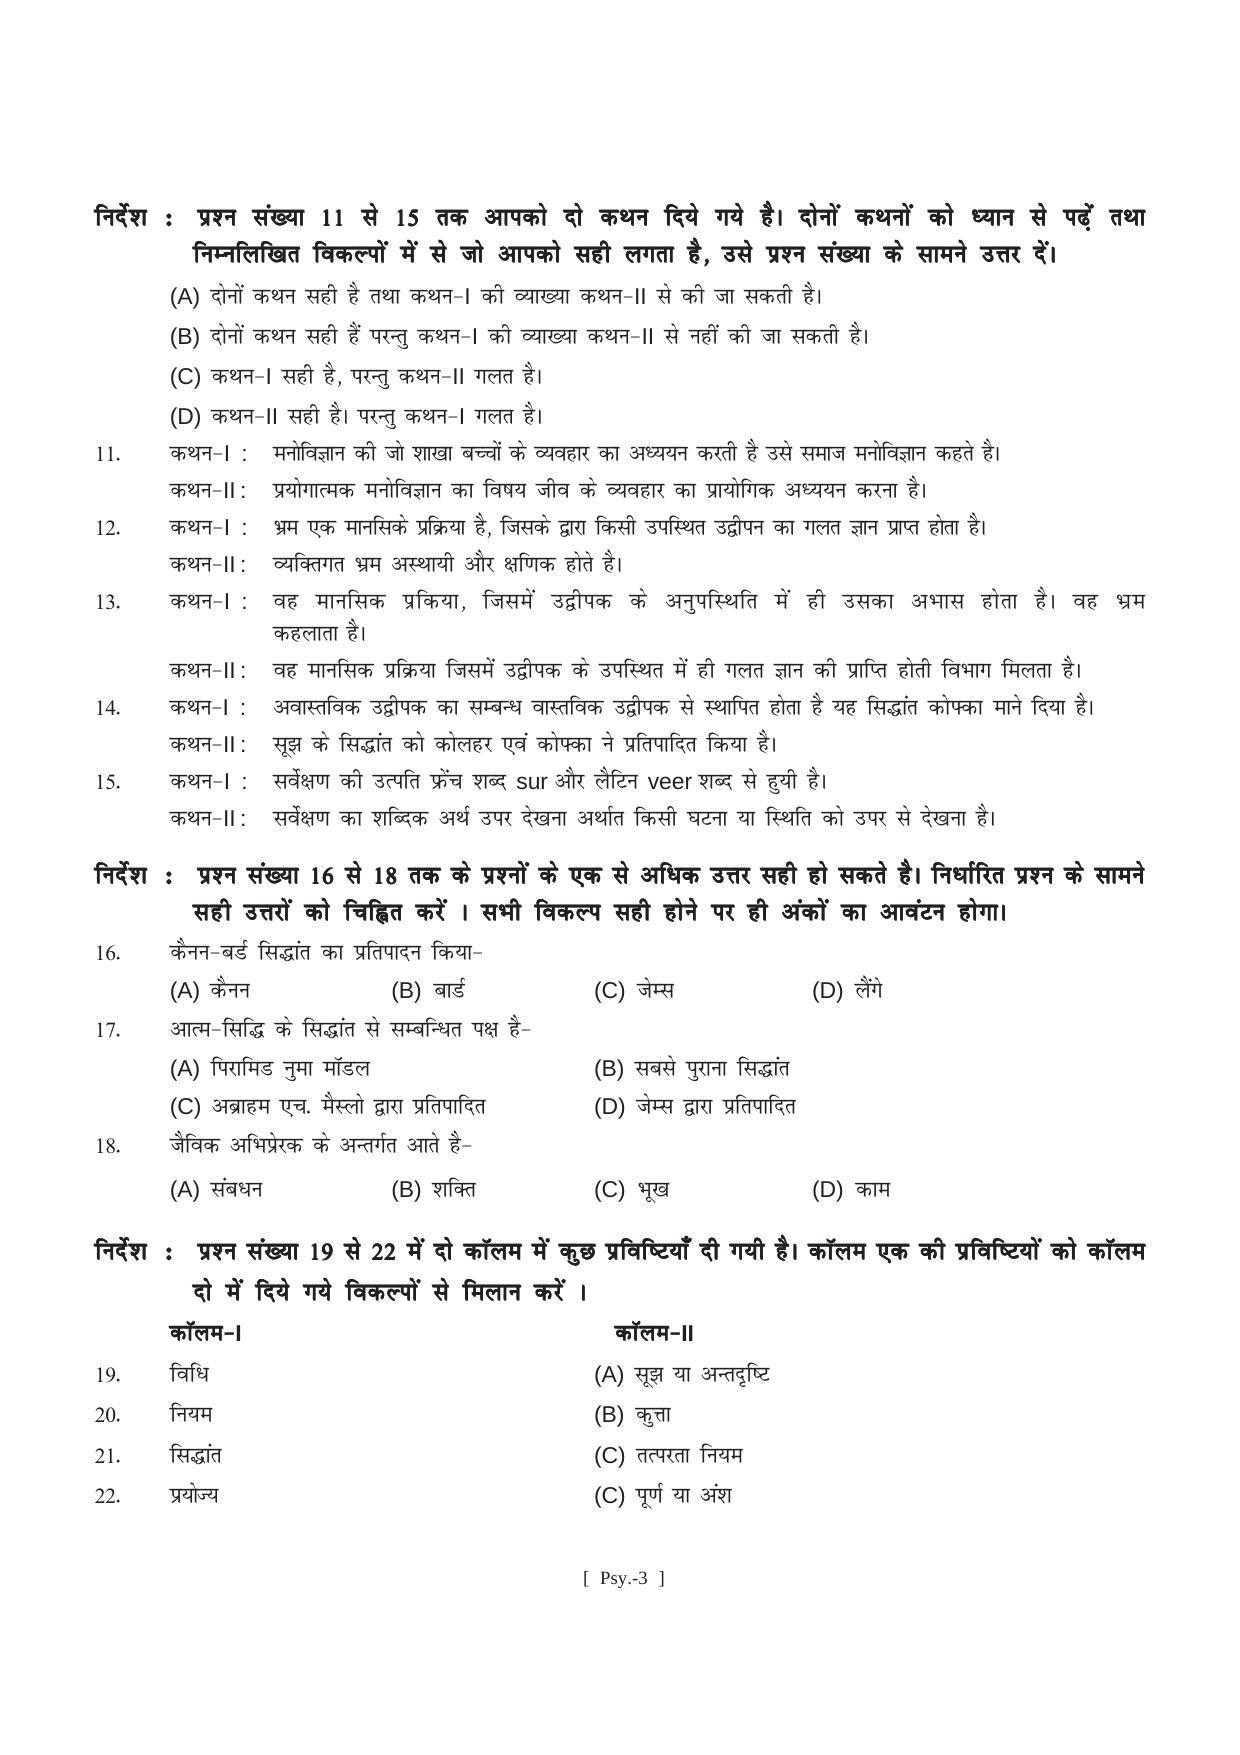 Bihar Board Class 11 Psychology (All Groups) Model Paper - Page 3